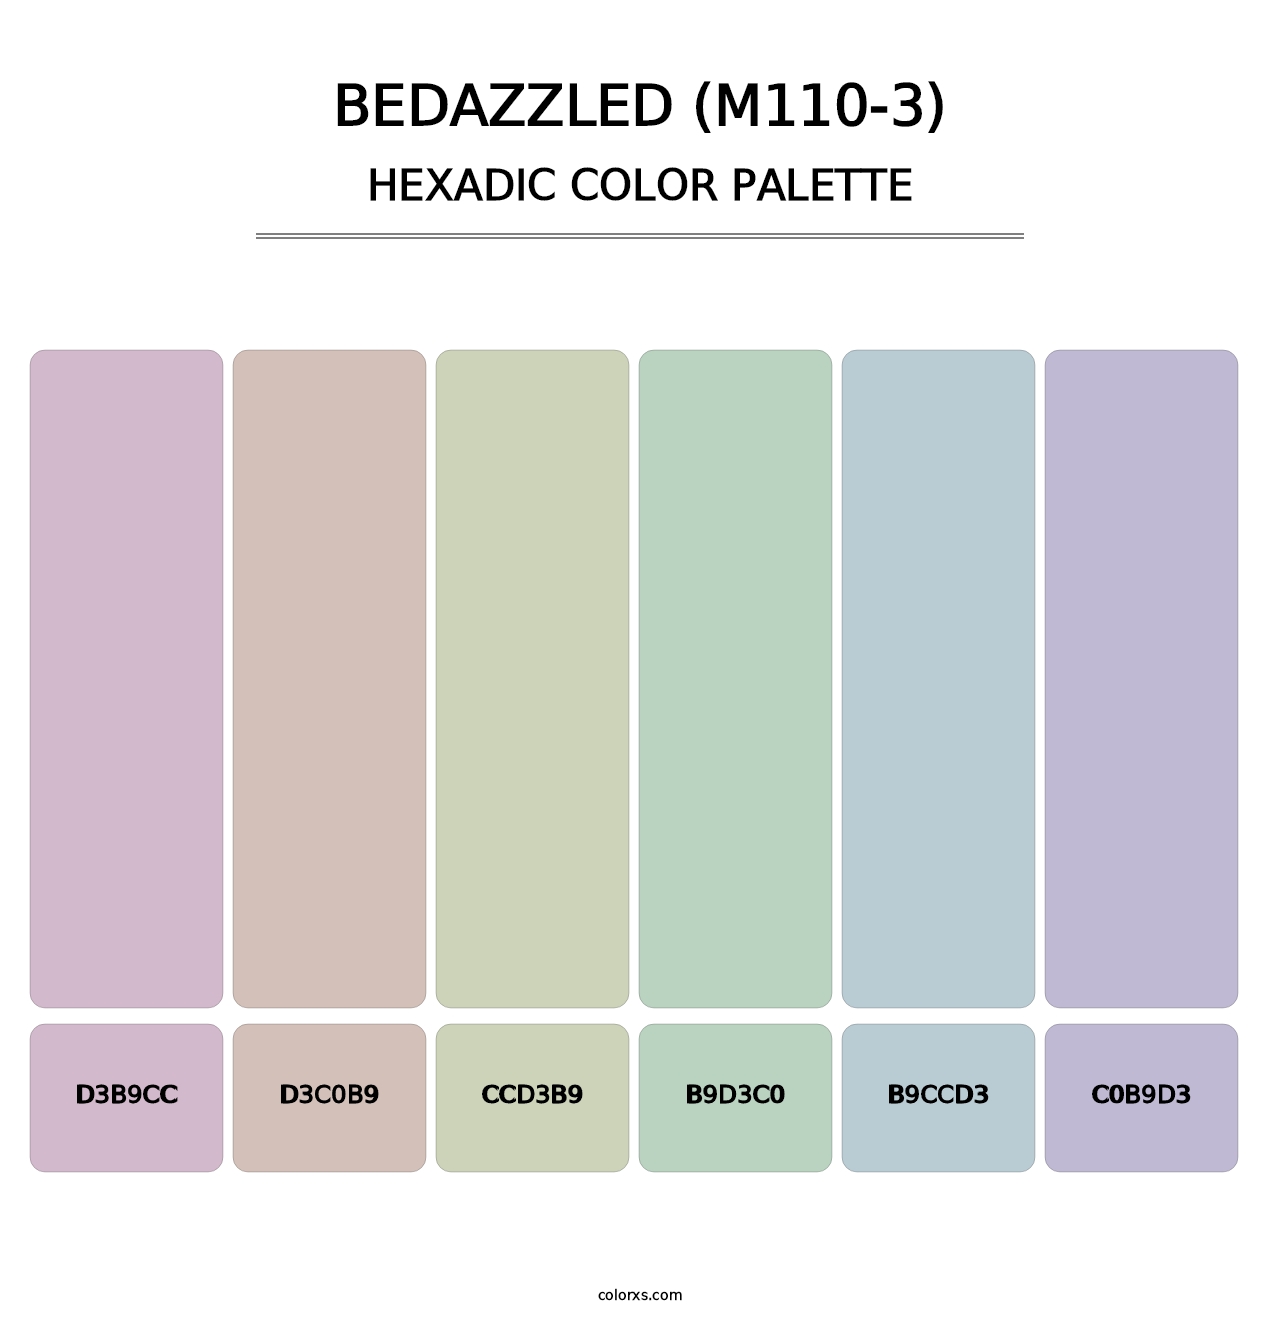 Bedazzled (M110-3) - Hexadic Color Palette